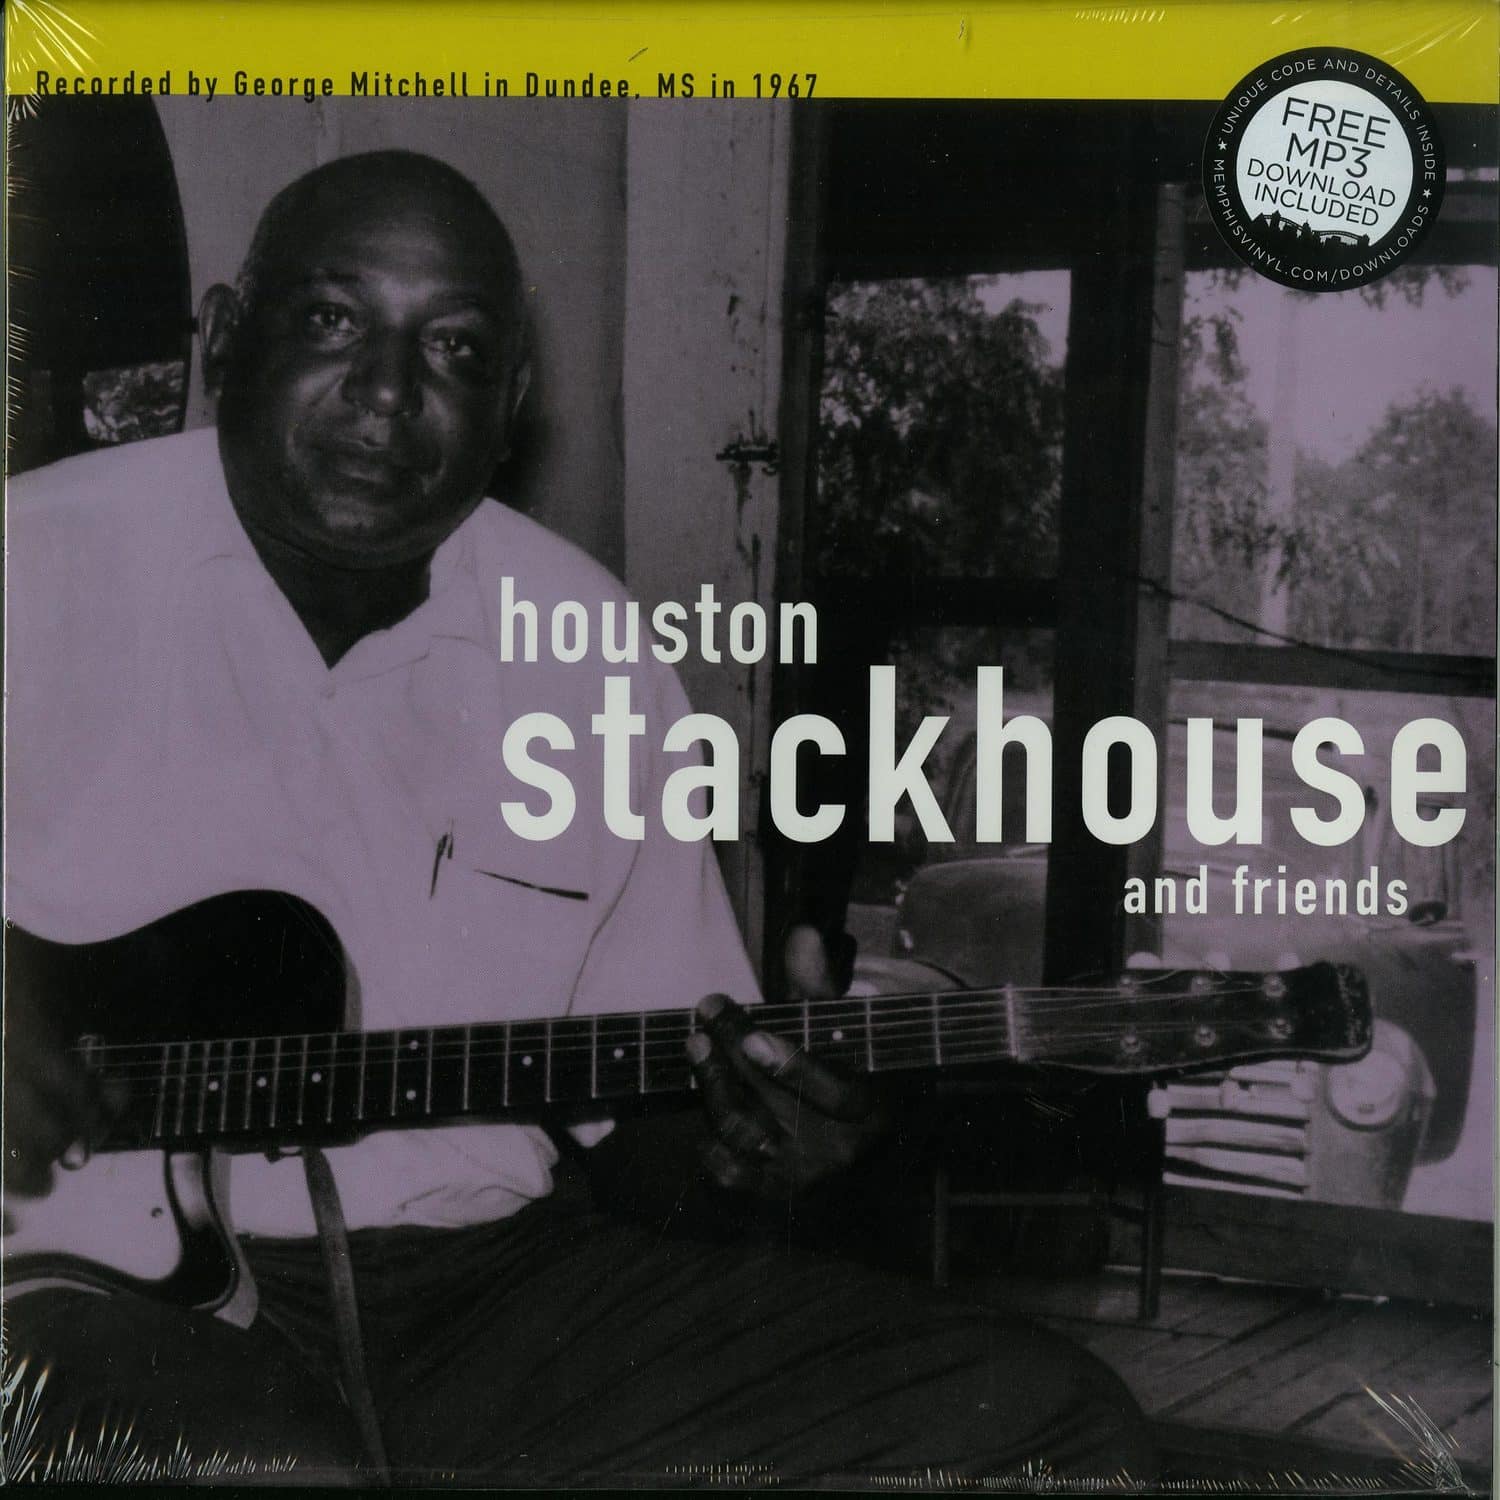 Houston Stackhouse And Friends - THE GEORGE MITCHELL COLLECTION 